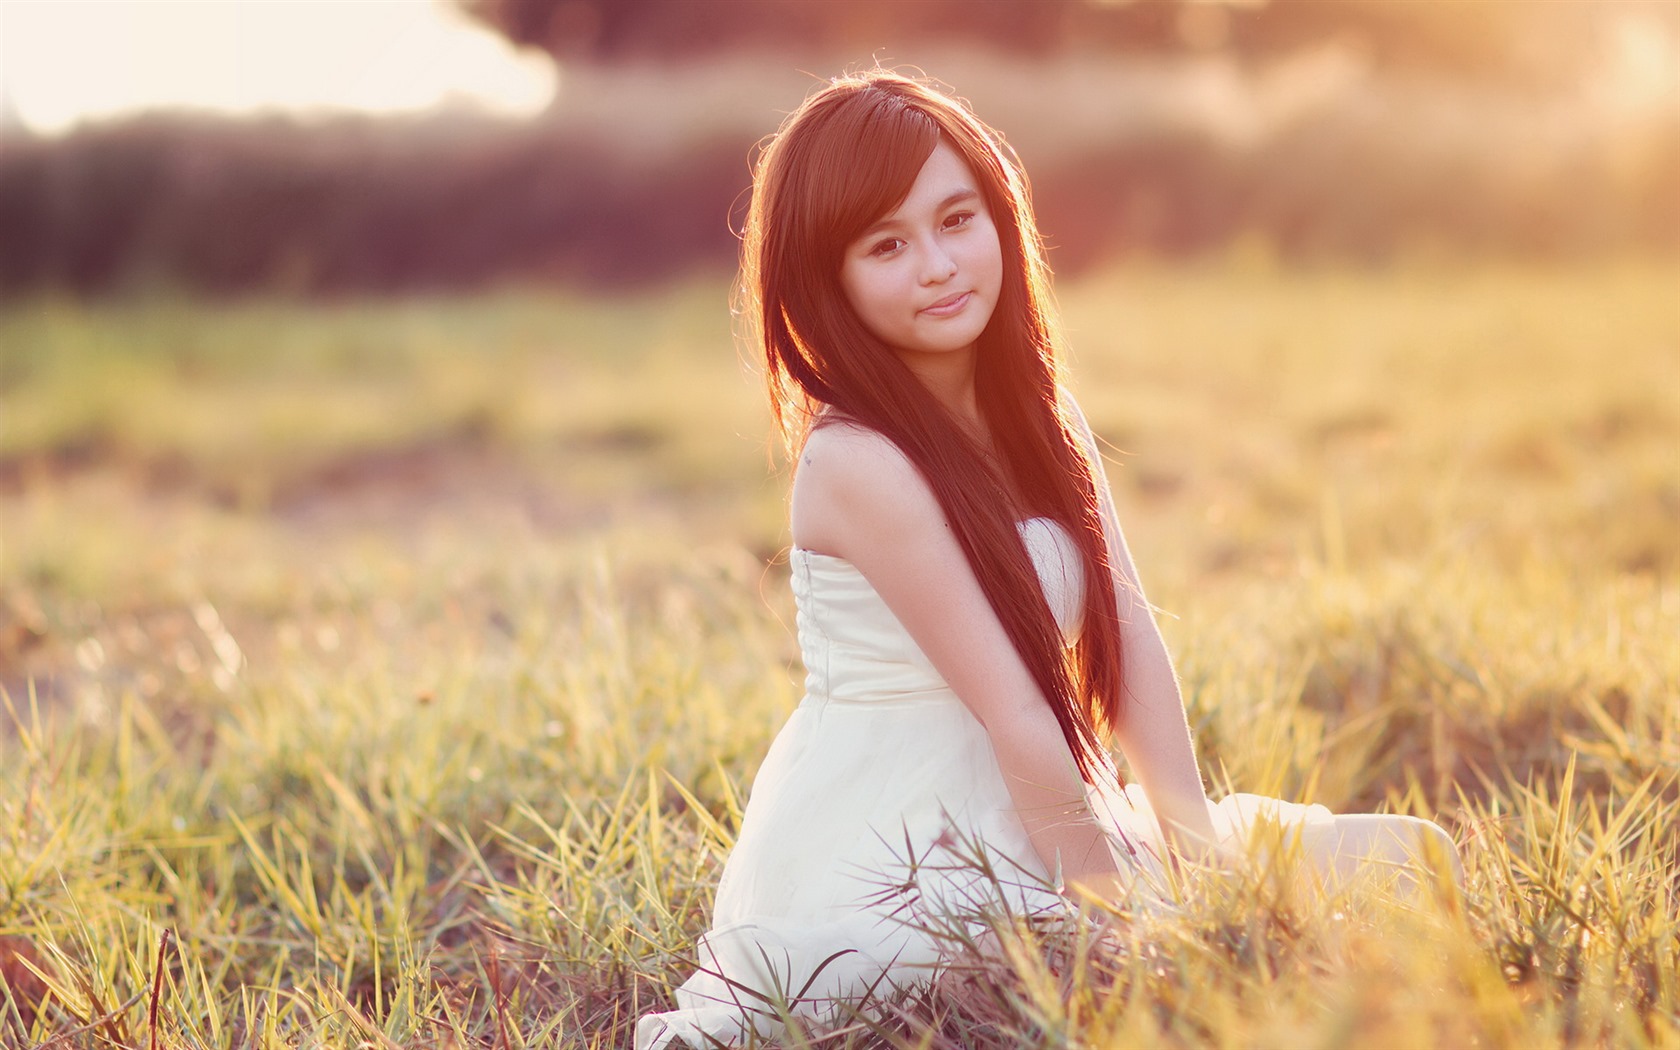 Pure and lovely young Asian girl HD wallpapers collection (5) #29 - 1680x1050